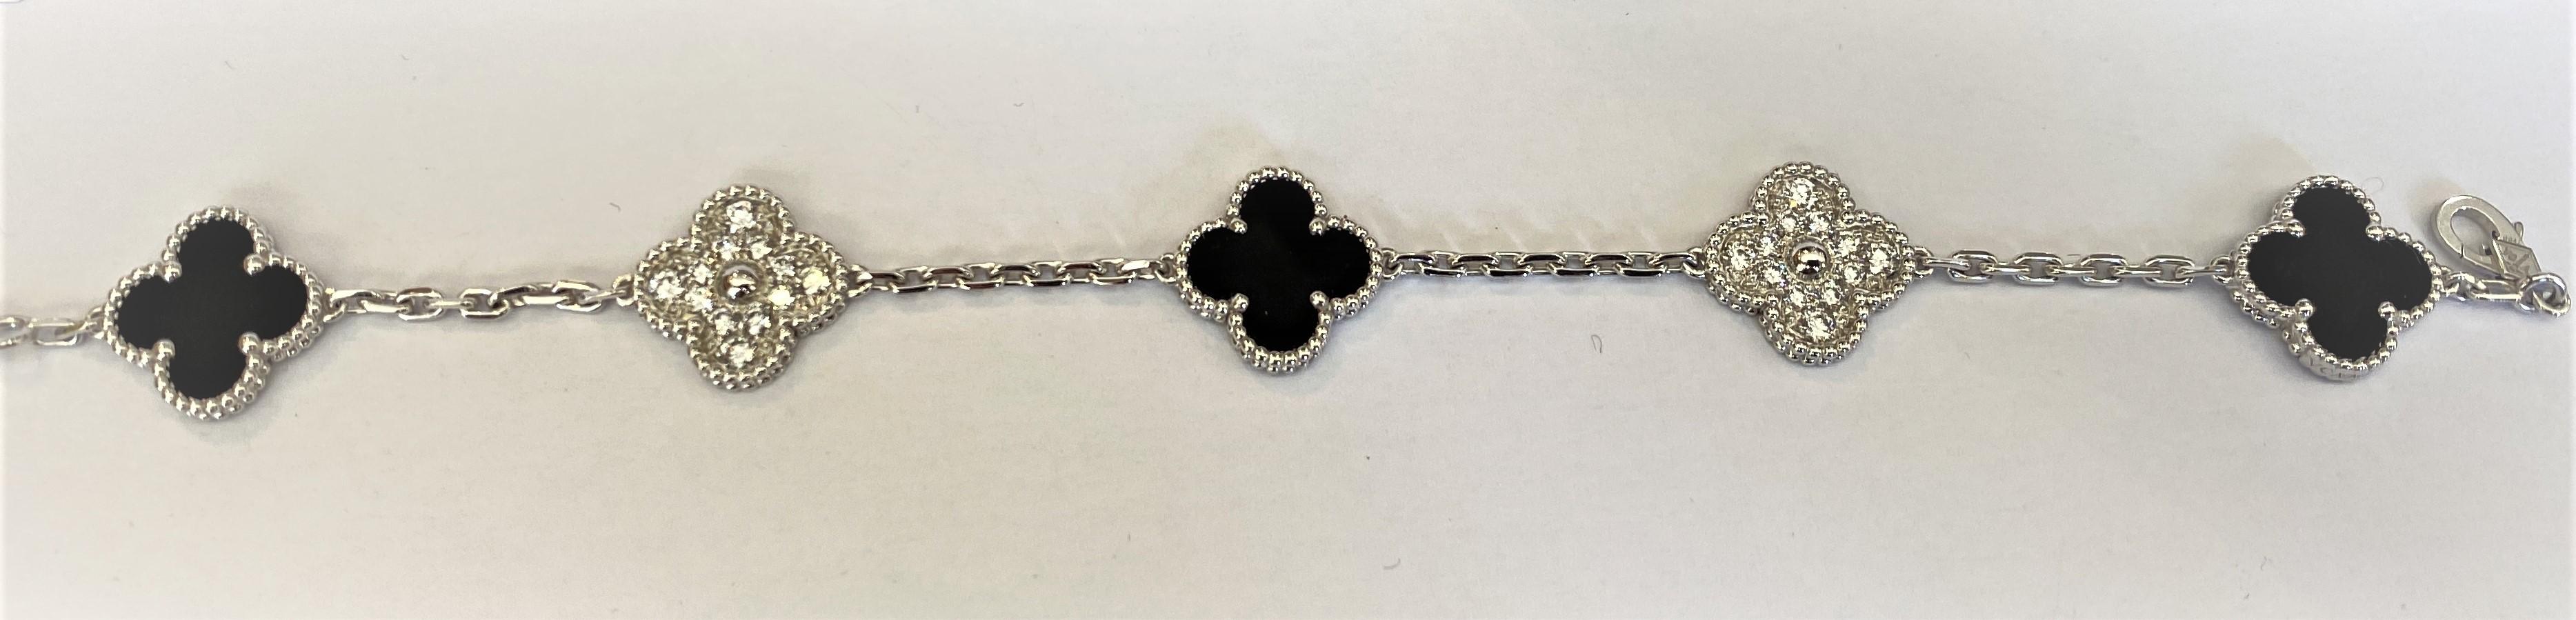 Van Cleef & Arpels Alhambra Bracelet in Diamonds and Onyx in 18k White Gold In Excellent Condition For Sale In Bilbao, ES